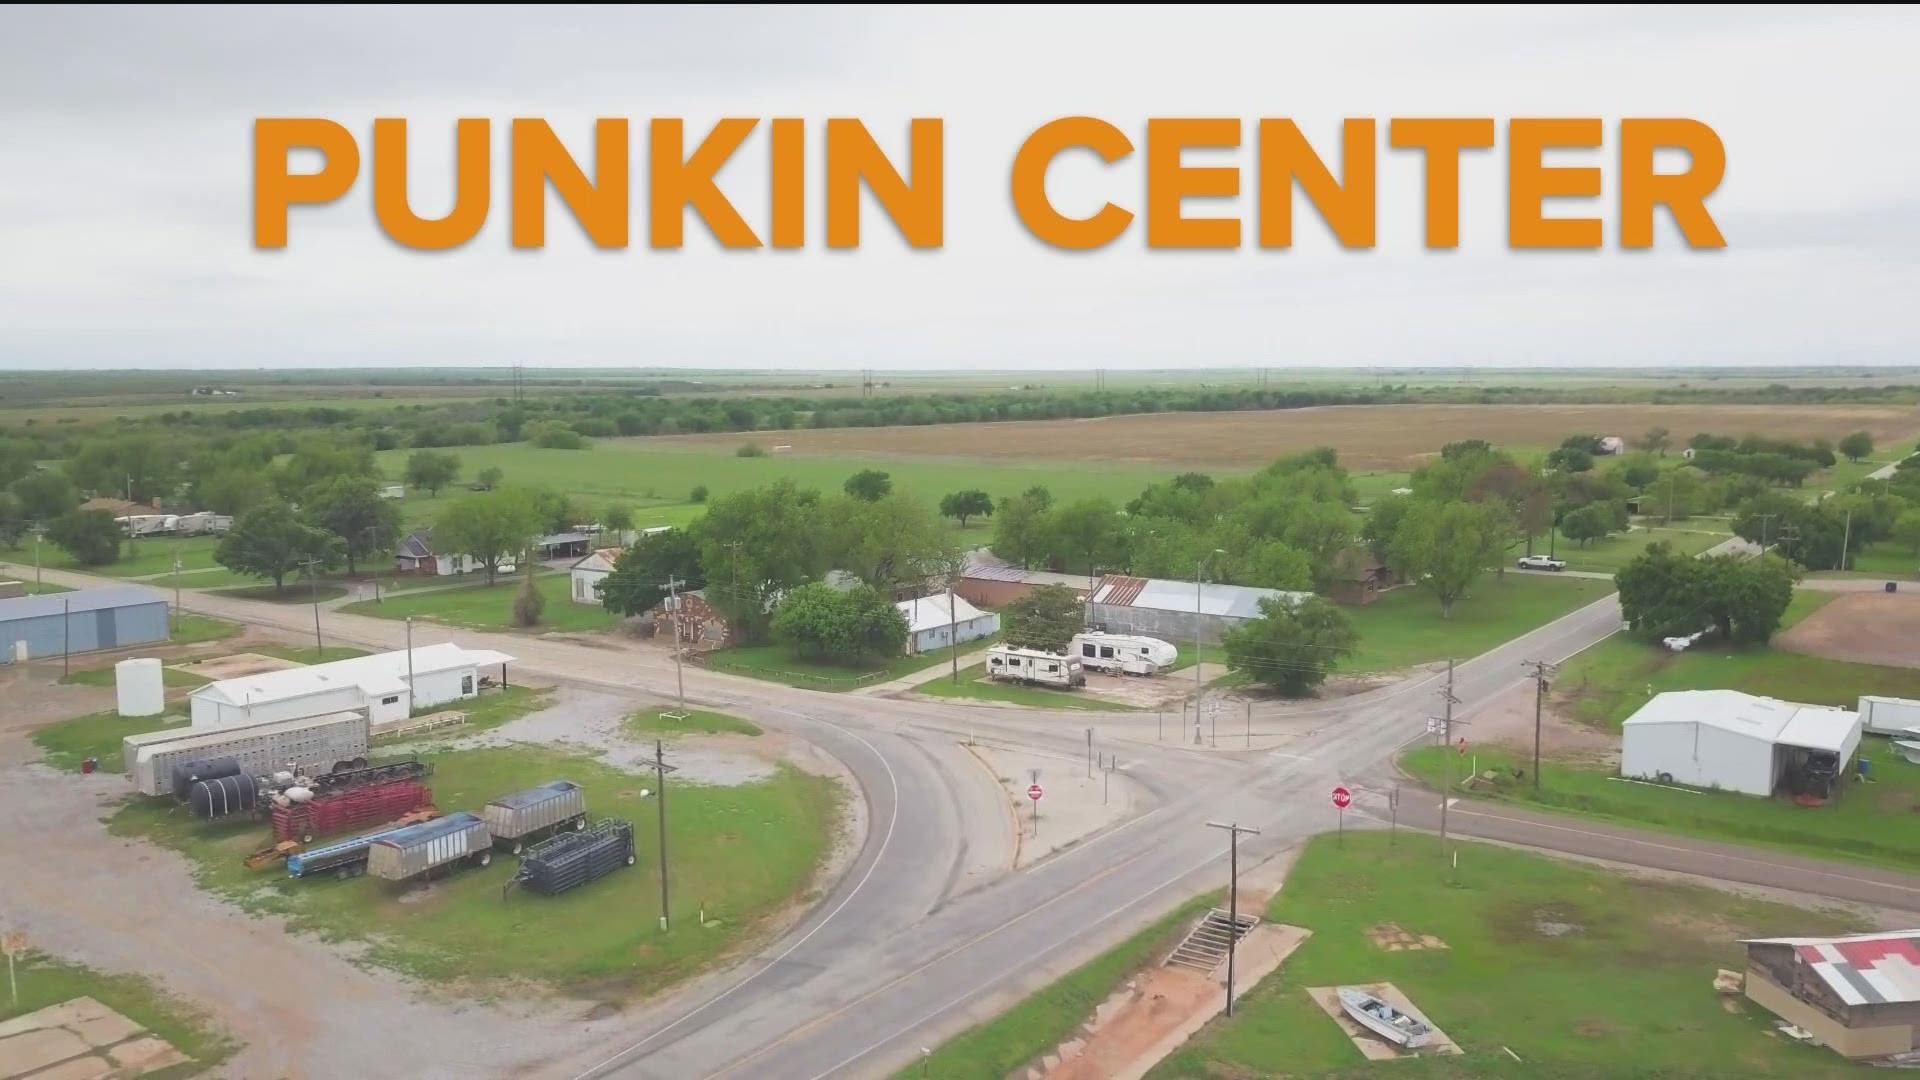 Here's how at least one town got the name Punkin Center in Texas.